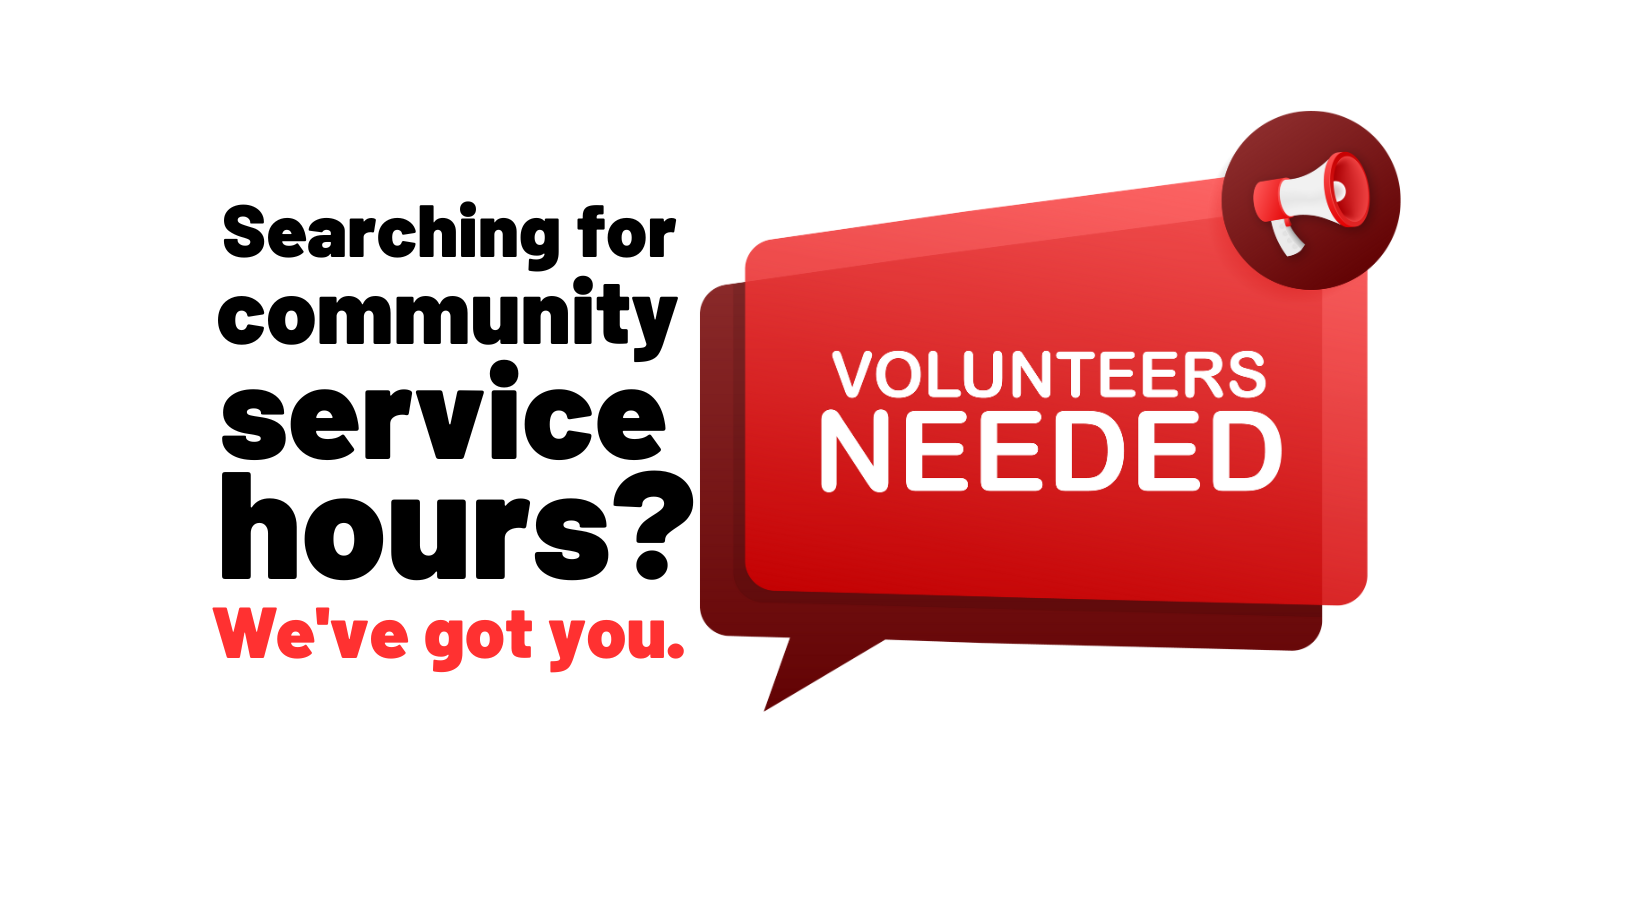 Searching for service hours? We’ve got you.